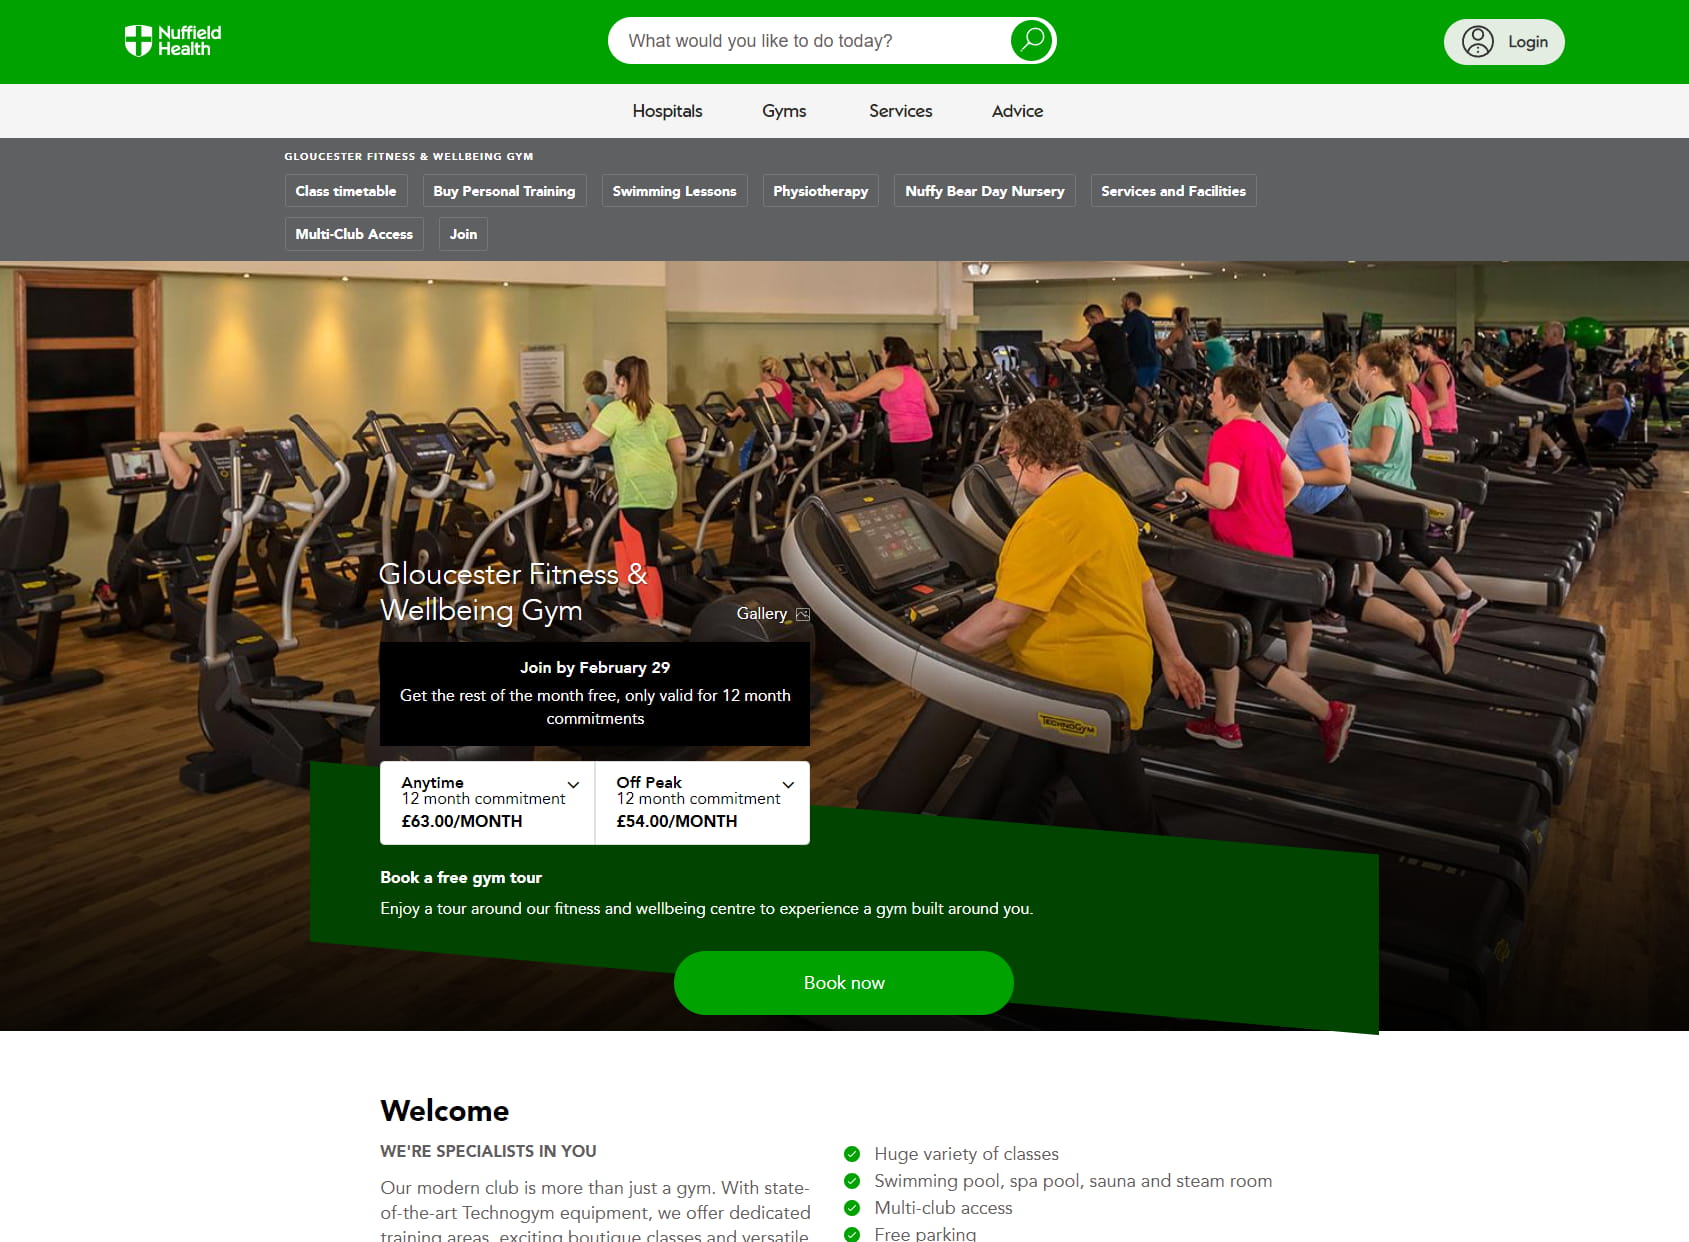 Nuffield Health Gloucester Fitness & Wellbeing Gym